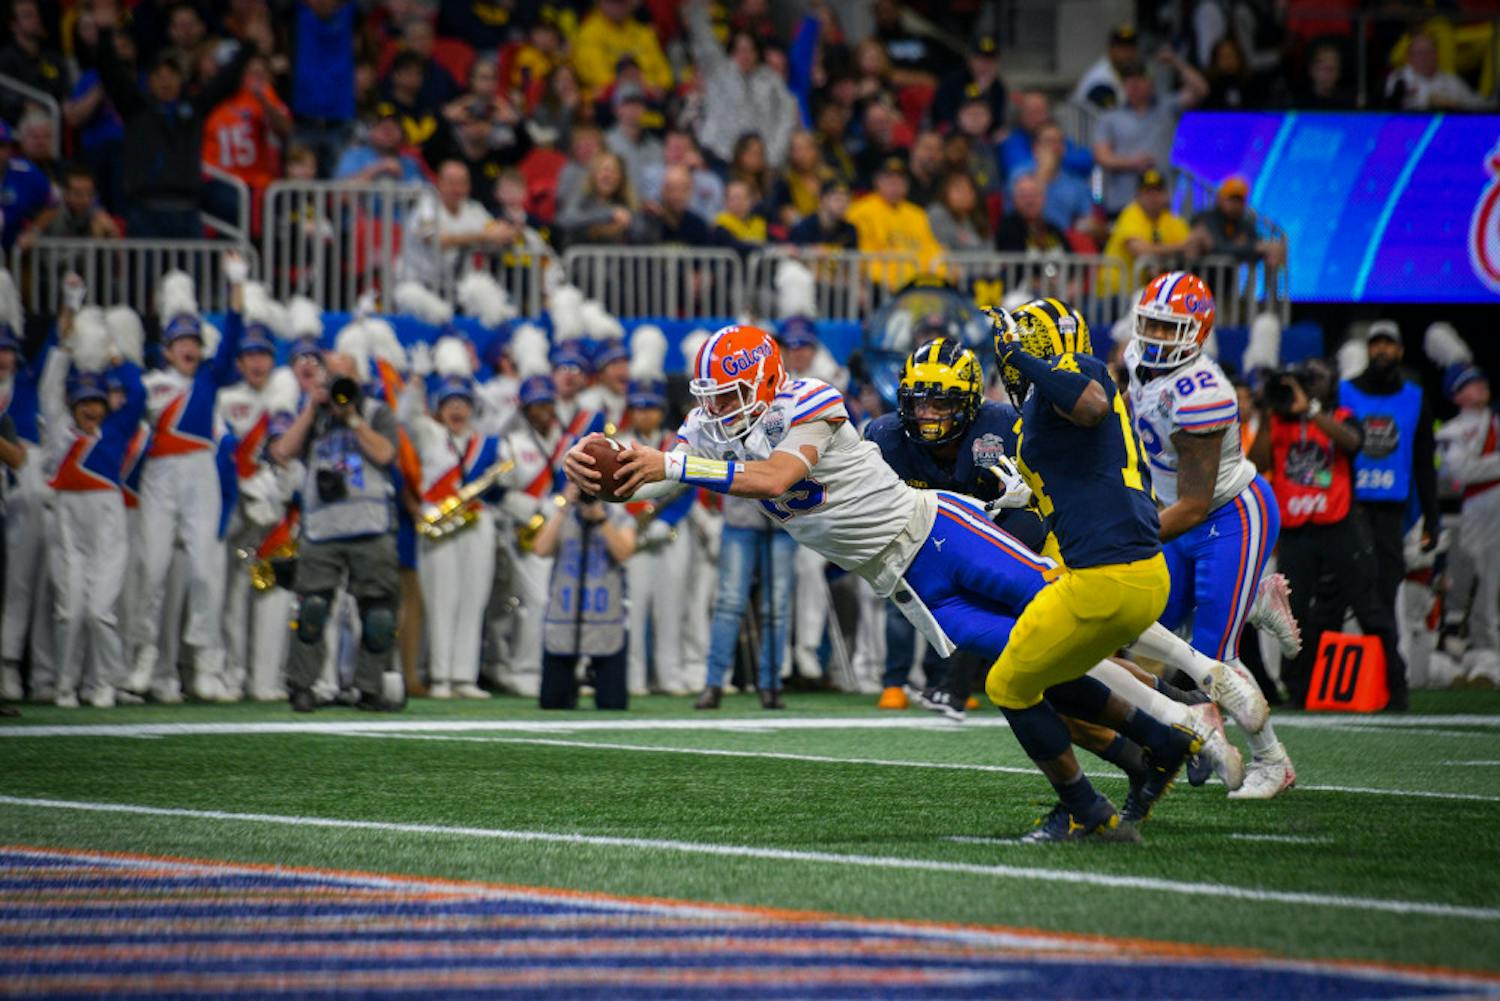 Florida quarterback Feleipe Franks had a breakout season last year, throwing for 2,457 yards with 24 touchdowns and six interceptions. He also rushed for seven scores.